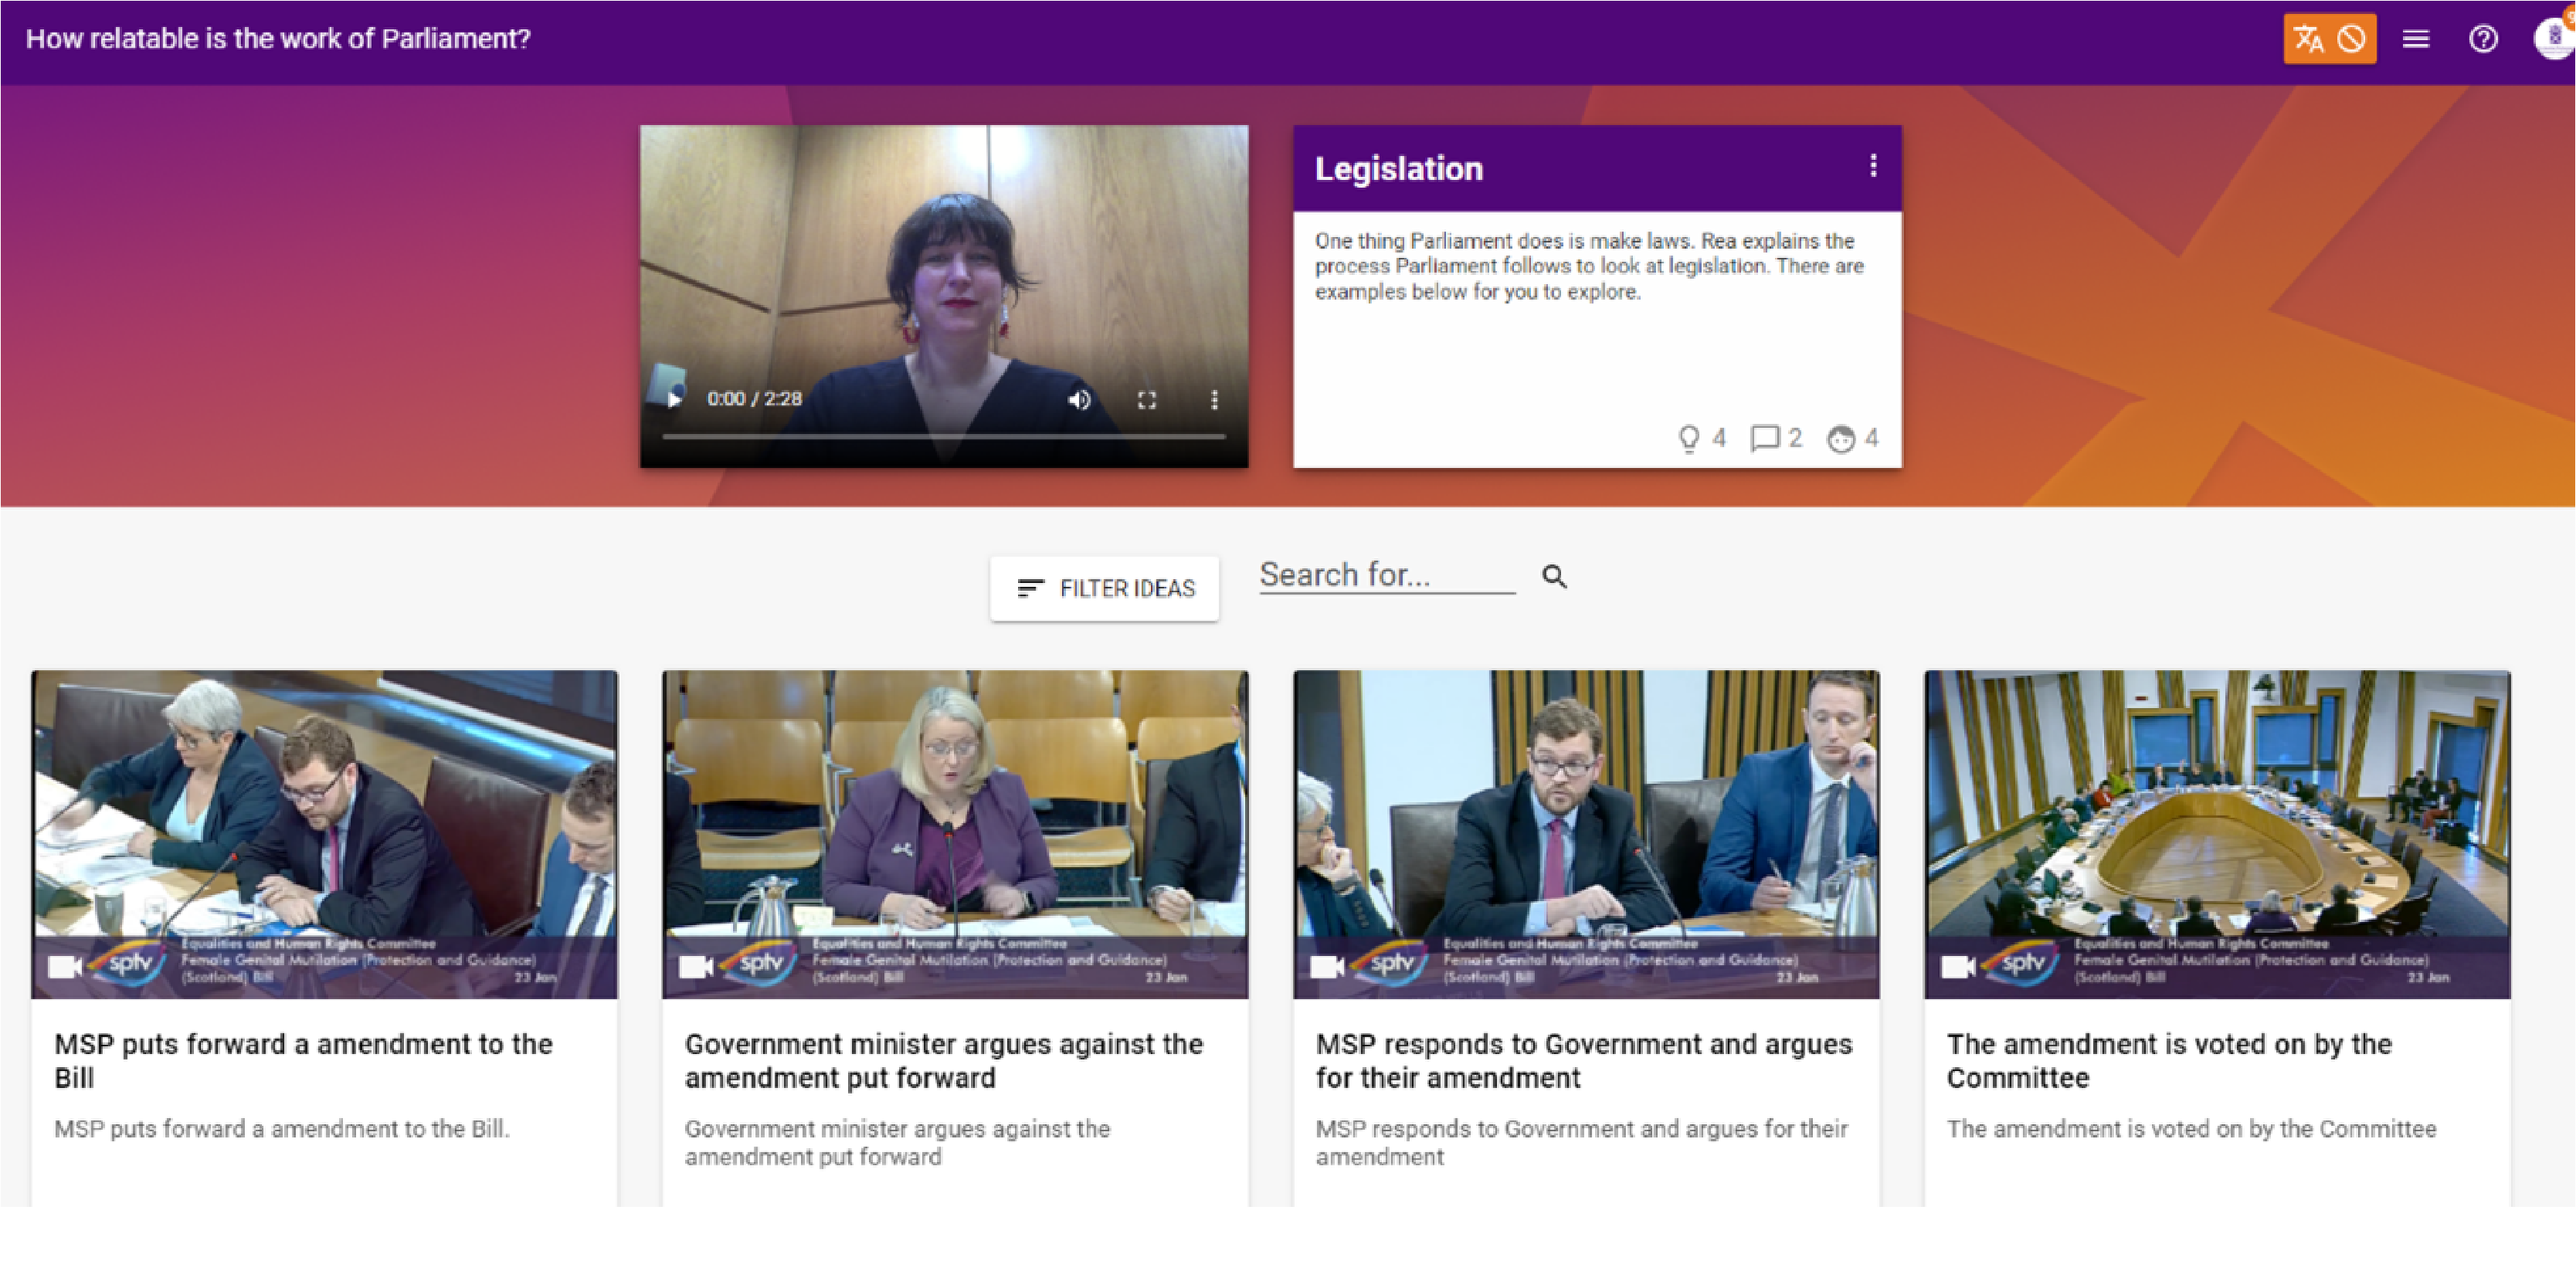 A screenshot of a website with links to videos and information about Parliamentary processes. Text on website reads: "One thing Parliament does is make laws. Rea explains the process Parliament follows to look at legislation. There are examples below for you to explore." The examples include: MSP puts forward a amendment to the Bill; Government minister argues against the amendment put forward; MSP responds to Government and argues for their amendment; and The amendment is voted on by the Committee.